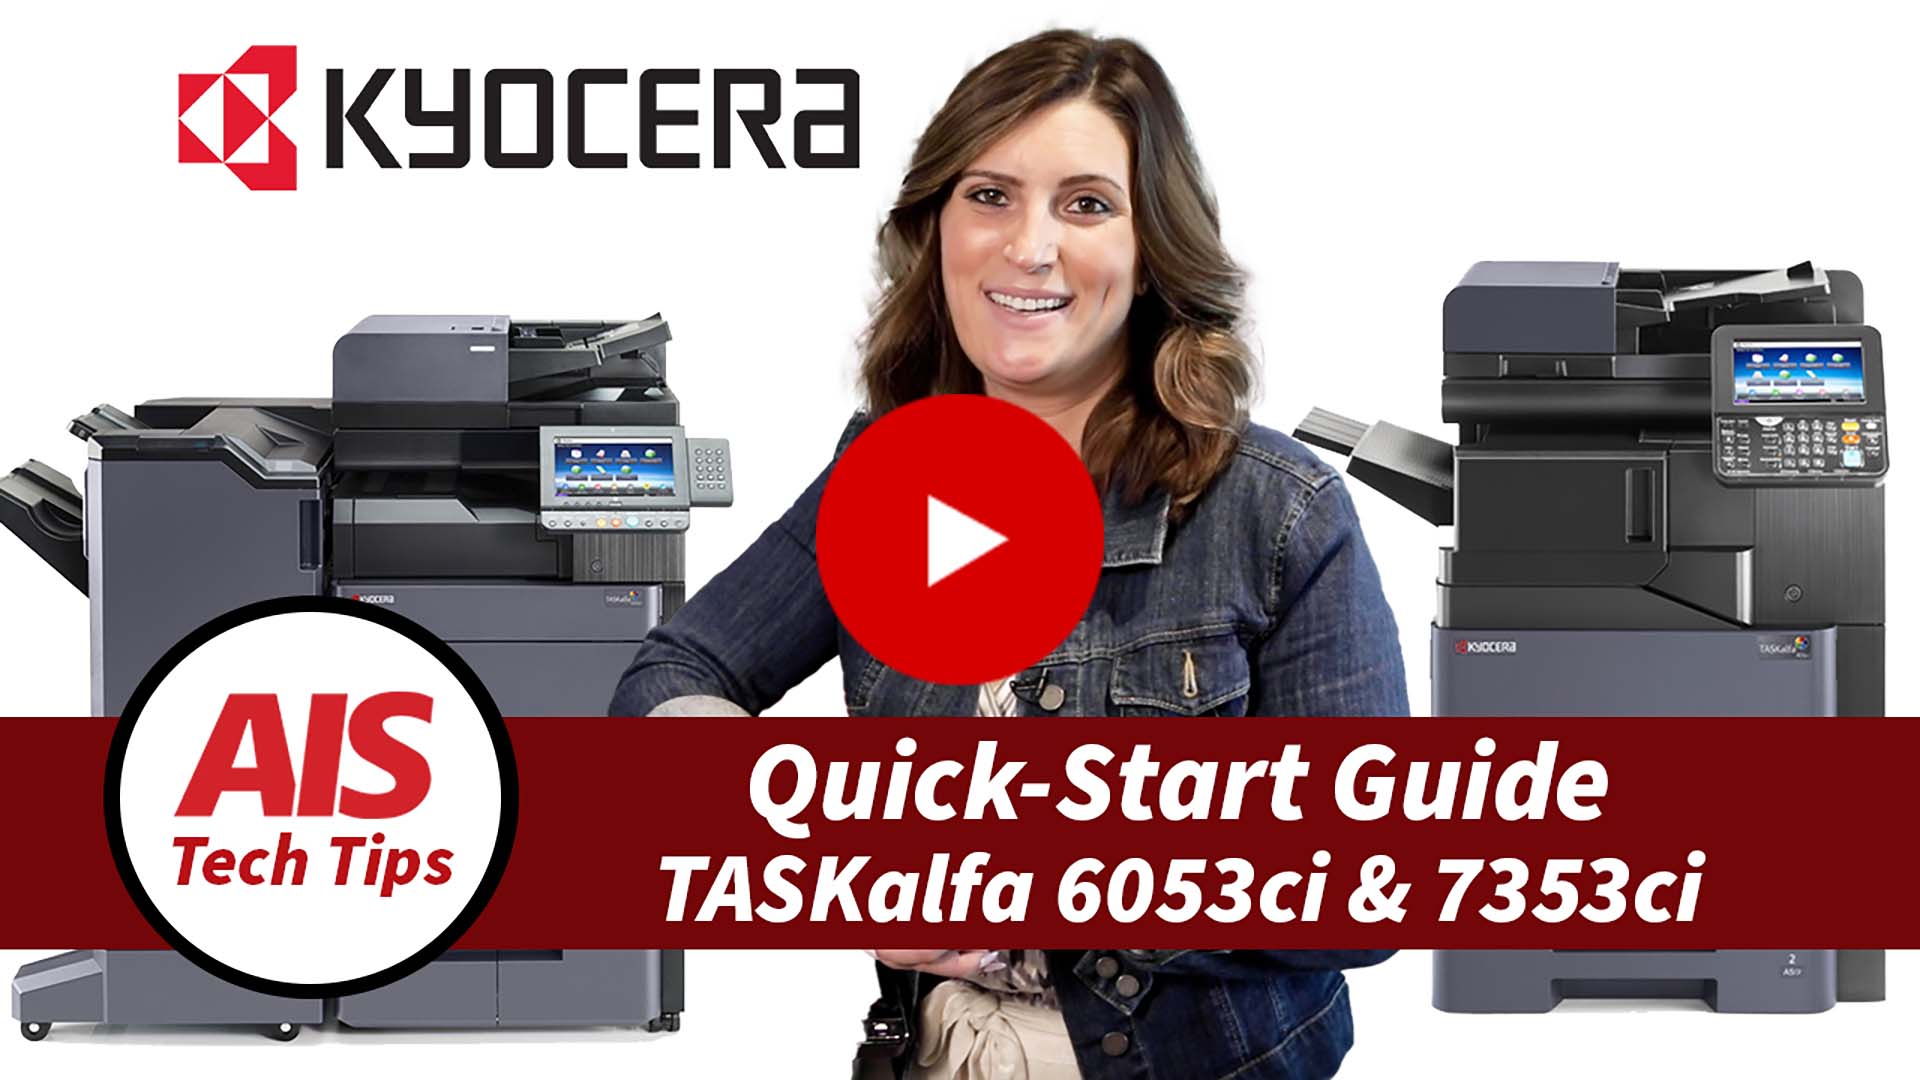 Kyocera Series 3 Quick-Start Guide